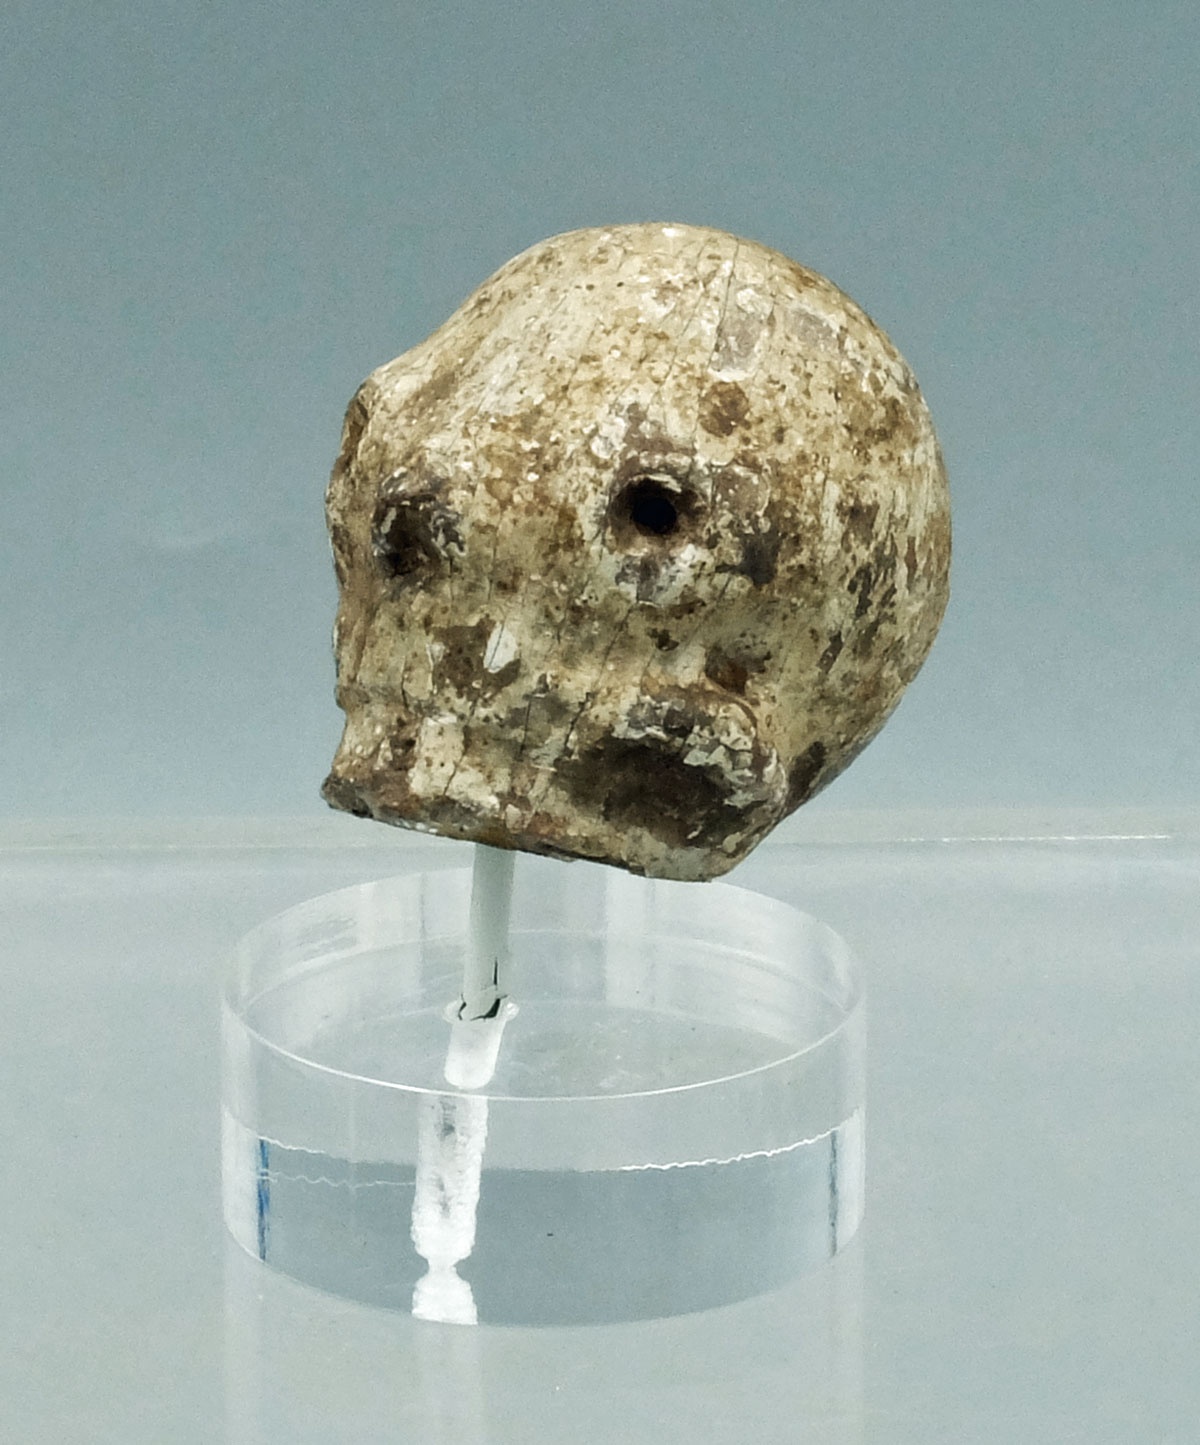 Human Skull Amulet - Teotihuacan, Mexico - Image 3 of 3